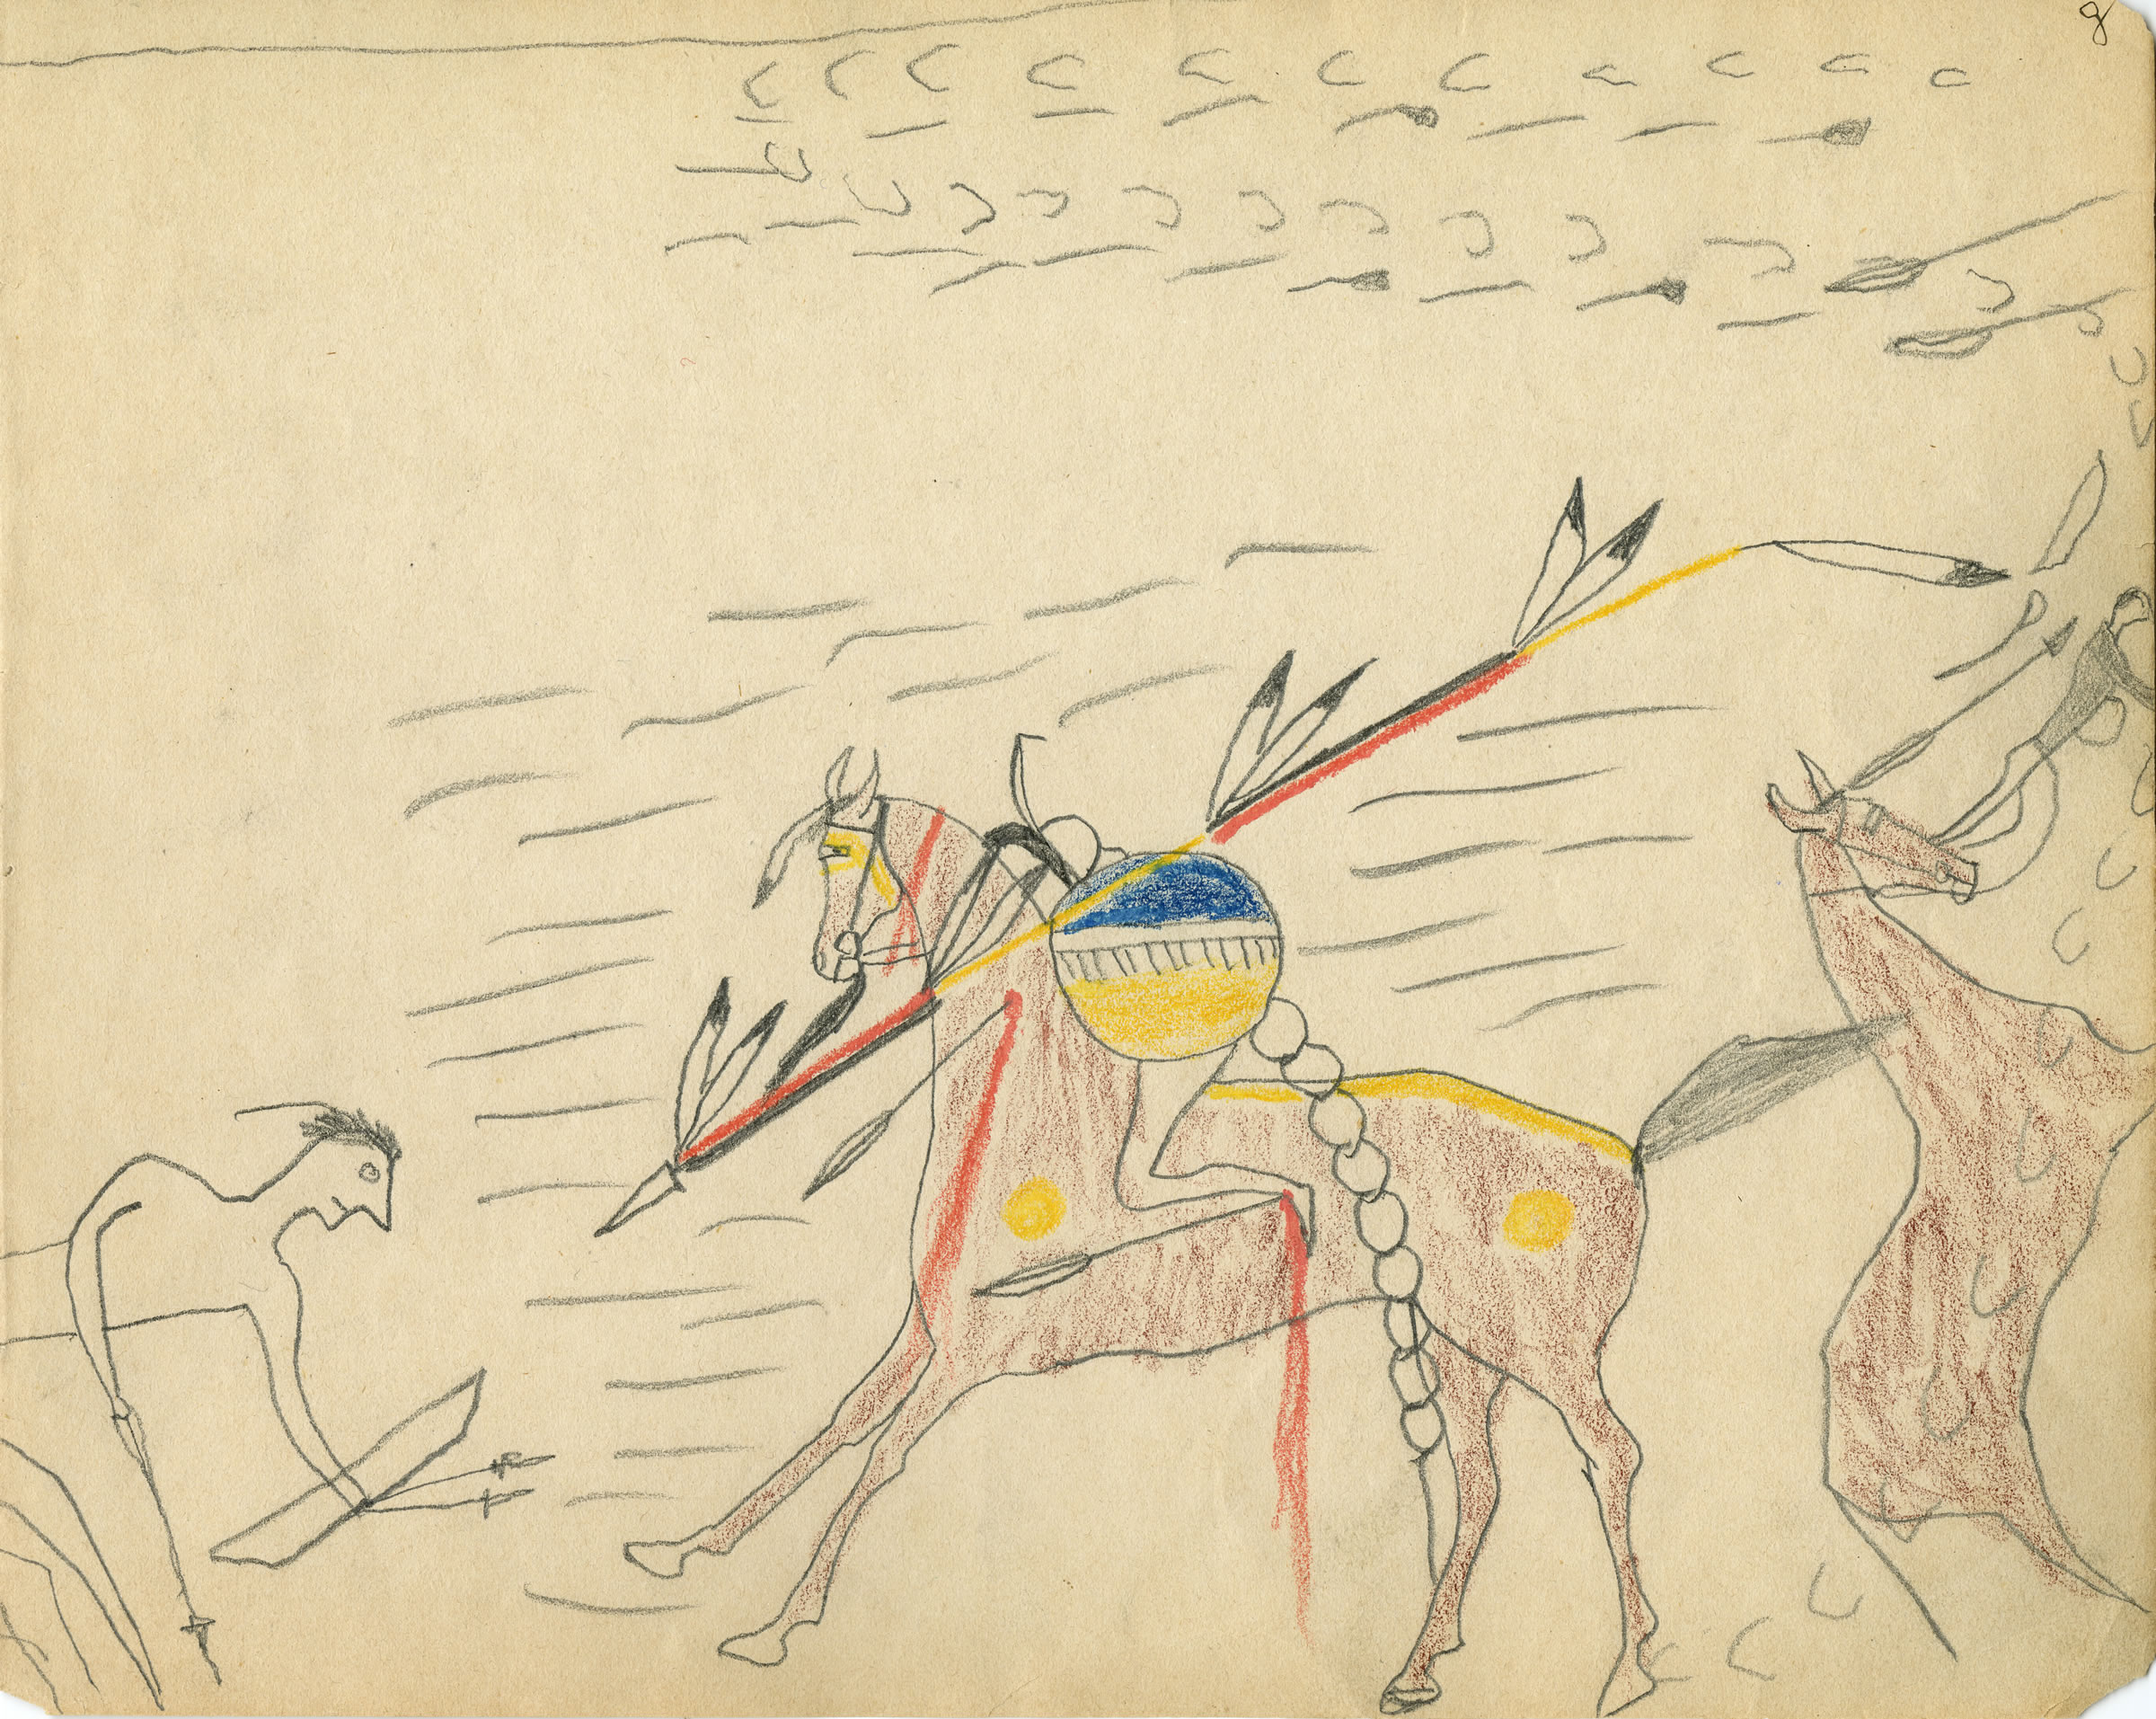 Fight against Pawnee war party. | Exploit shown in detail: Lakota warrior lancing Pawnee holding bow and arrows, cavalry man to right unhorsed and killed previously. 